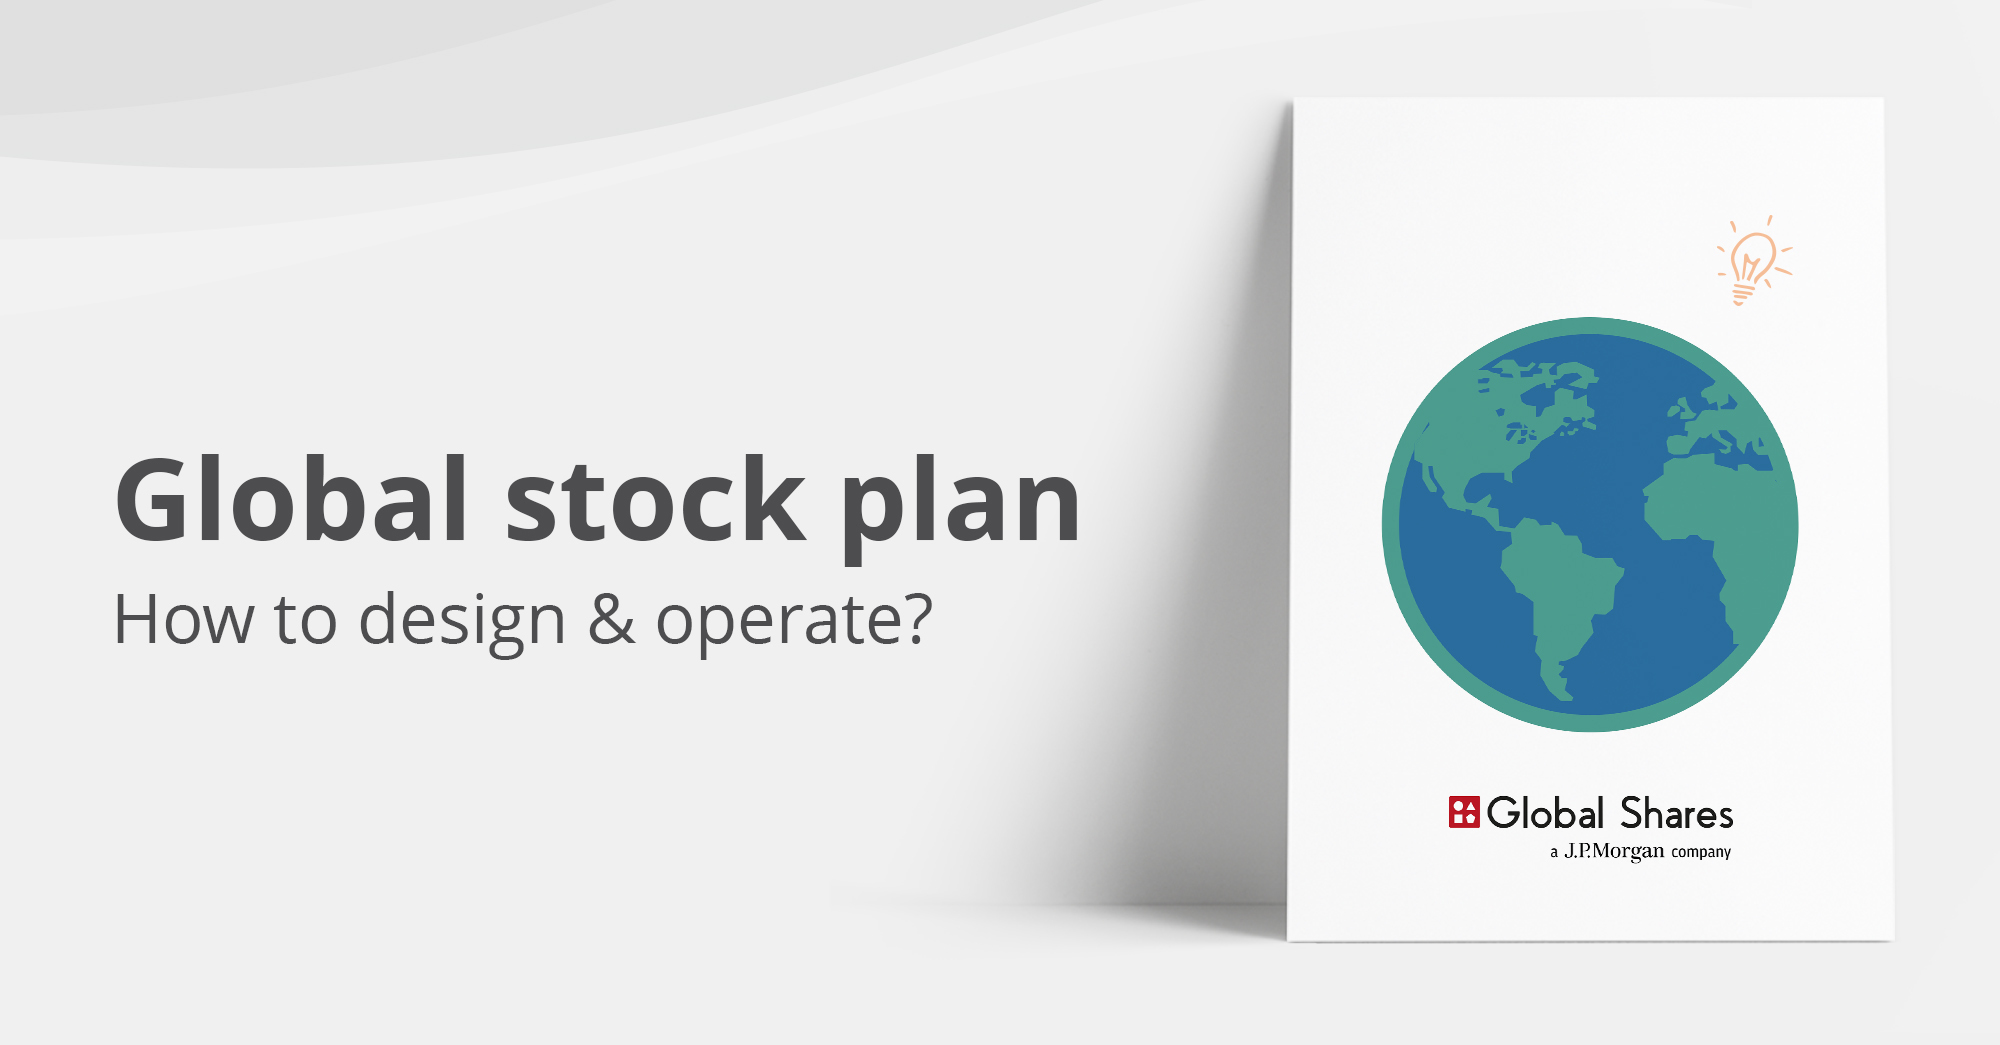 Global stock plan: How to design & operate?